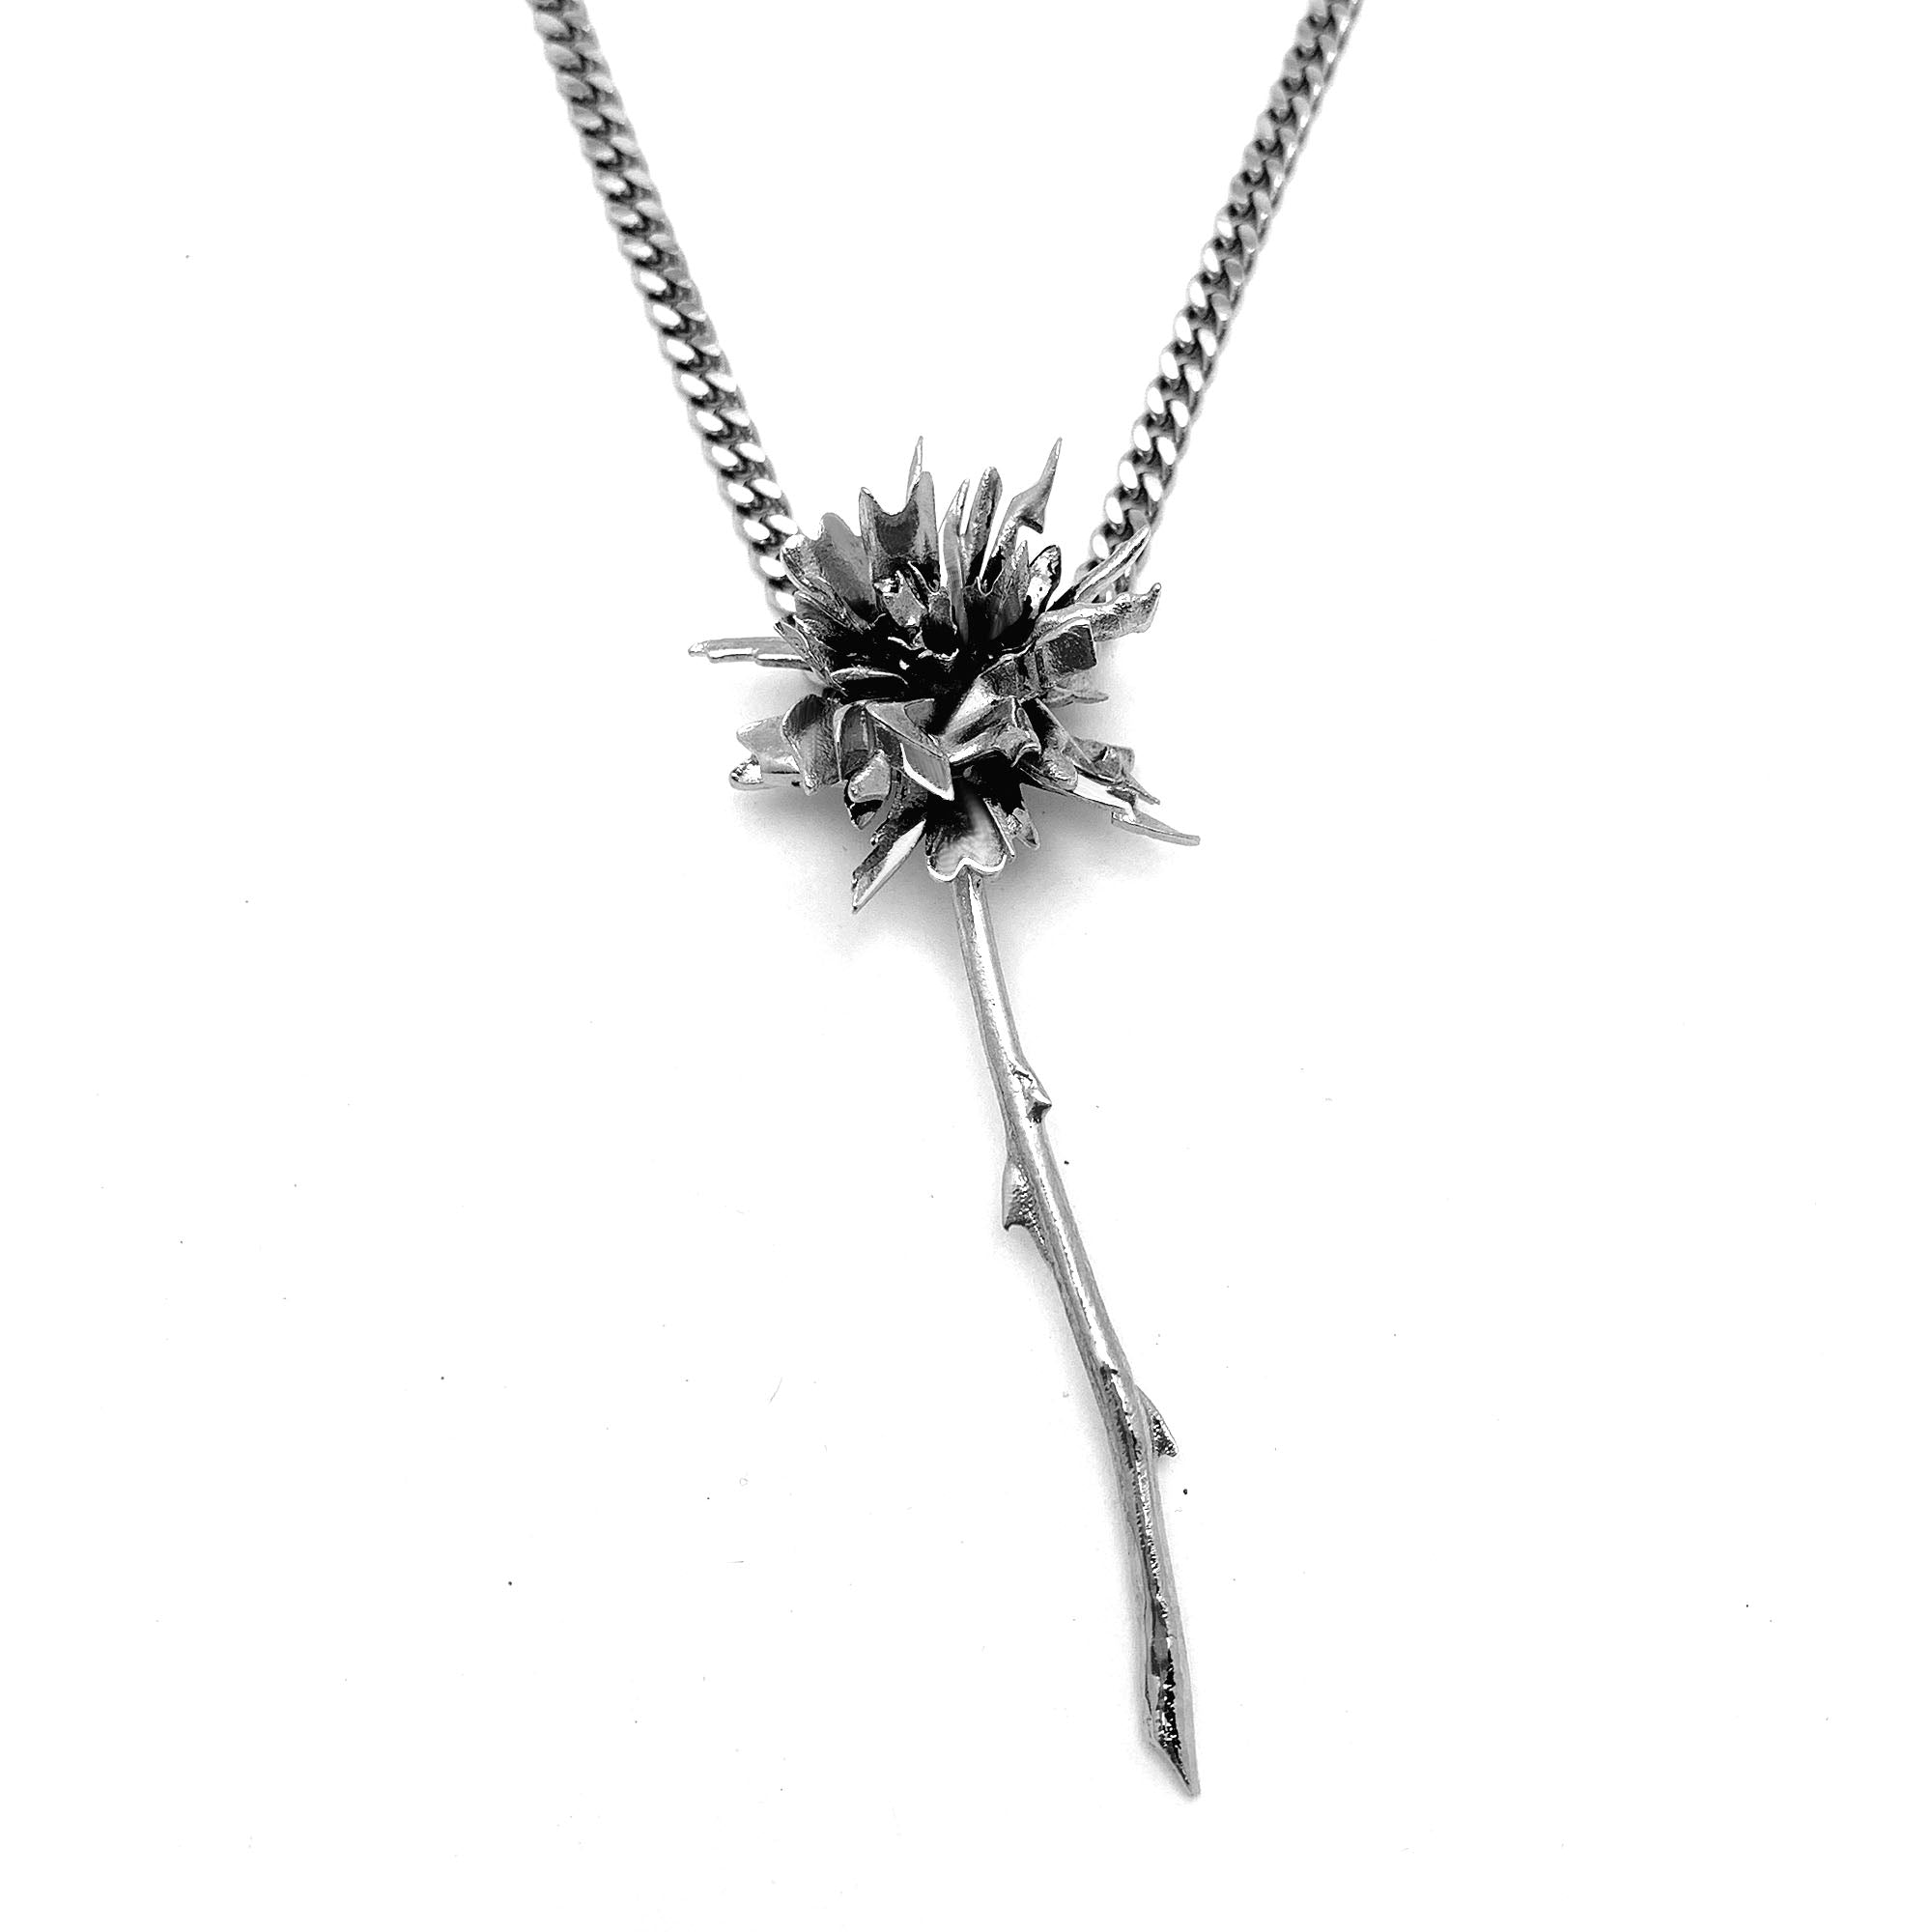 THE GLITCH FLORAL NECKLACE